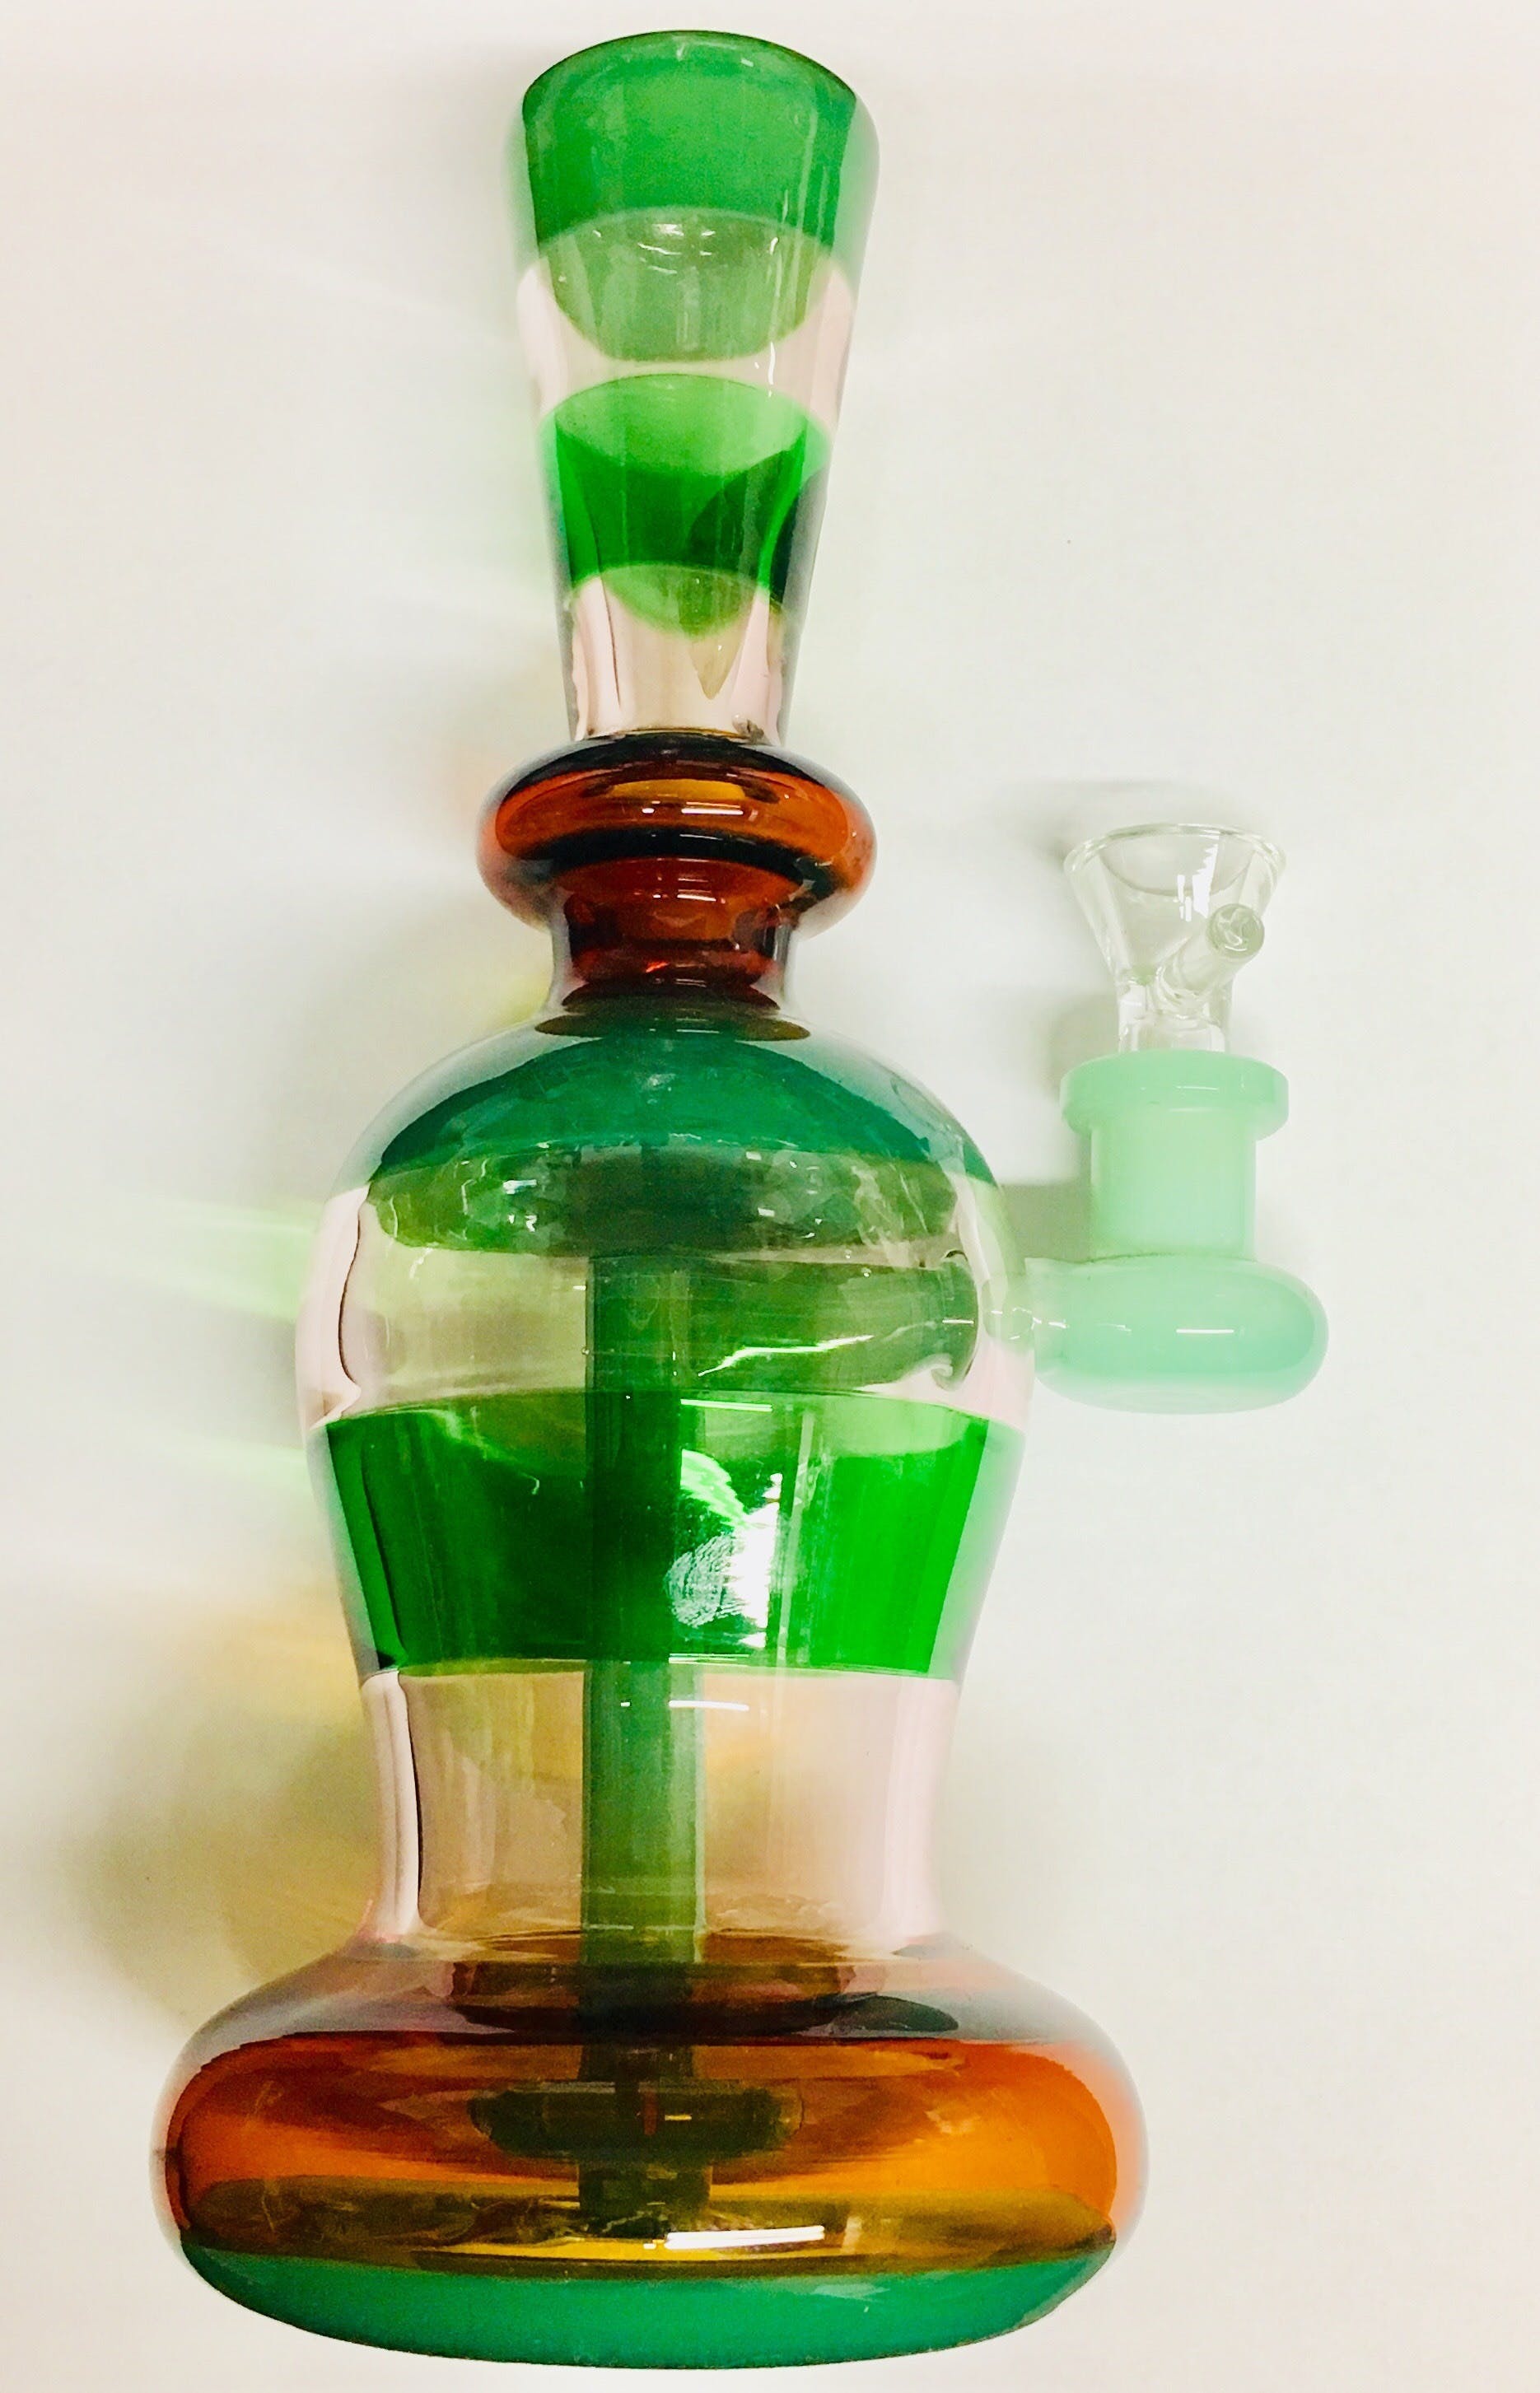 gear-2470-green-and-orange-striped-bong